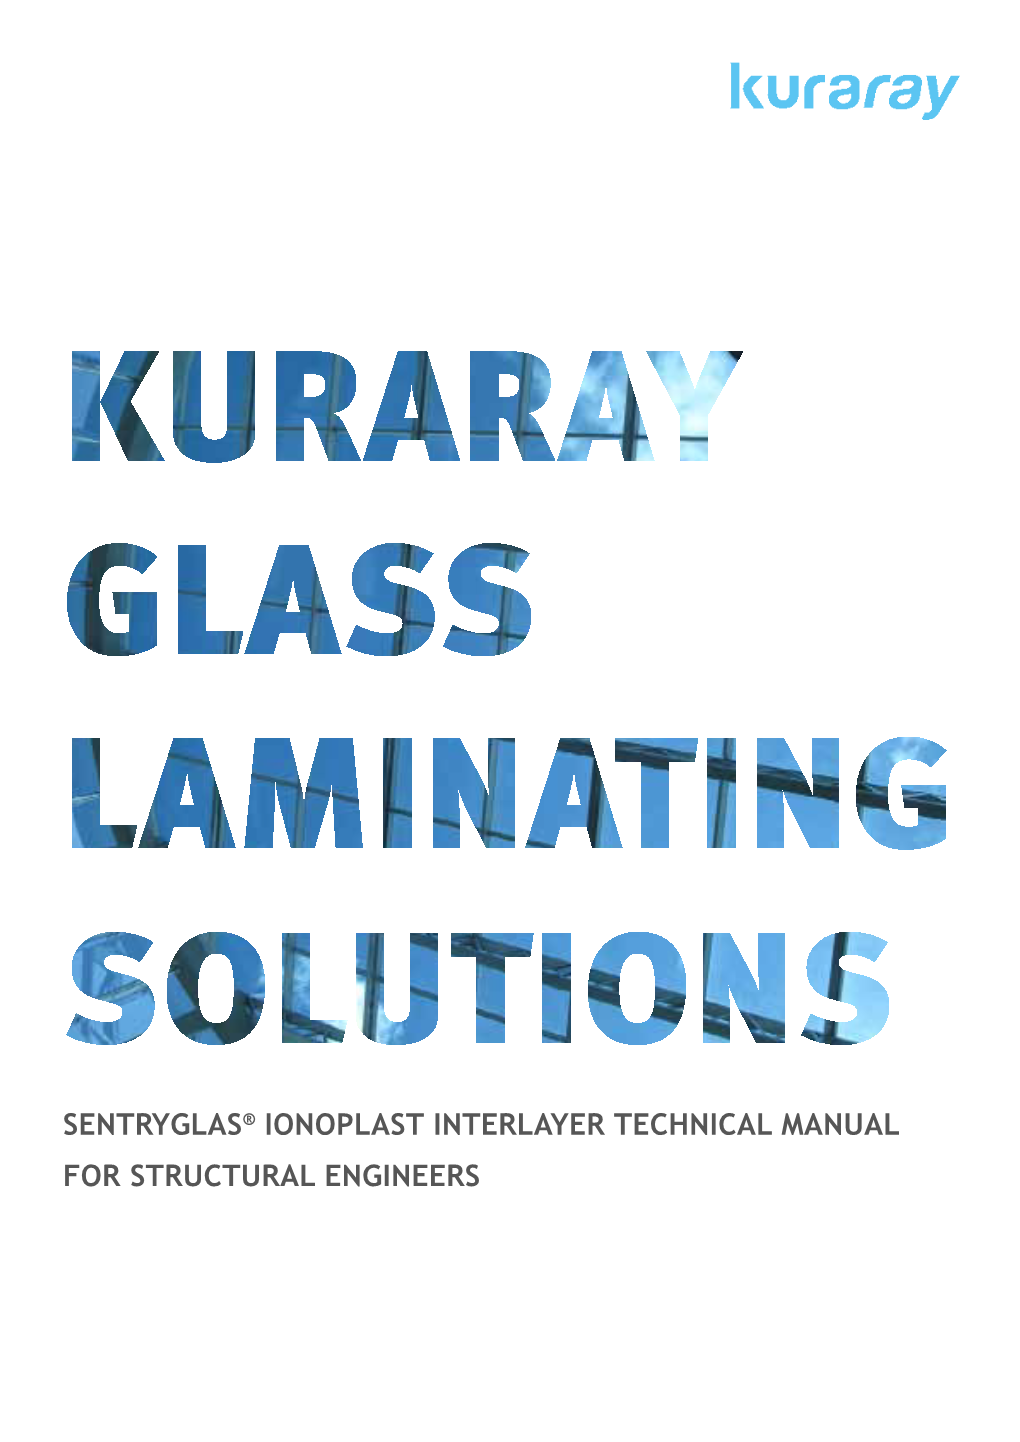 Sentryglas® Ionoplast Interlayer Technical Manual for Structural Engineers Contents